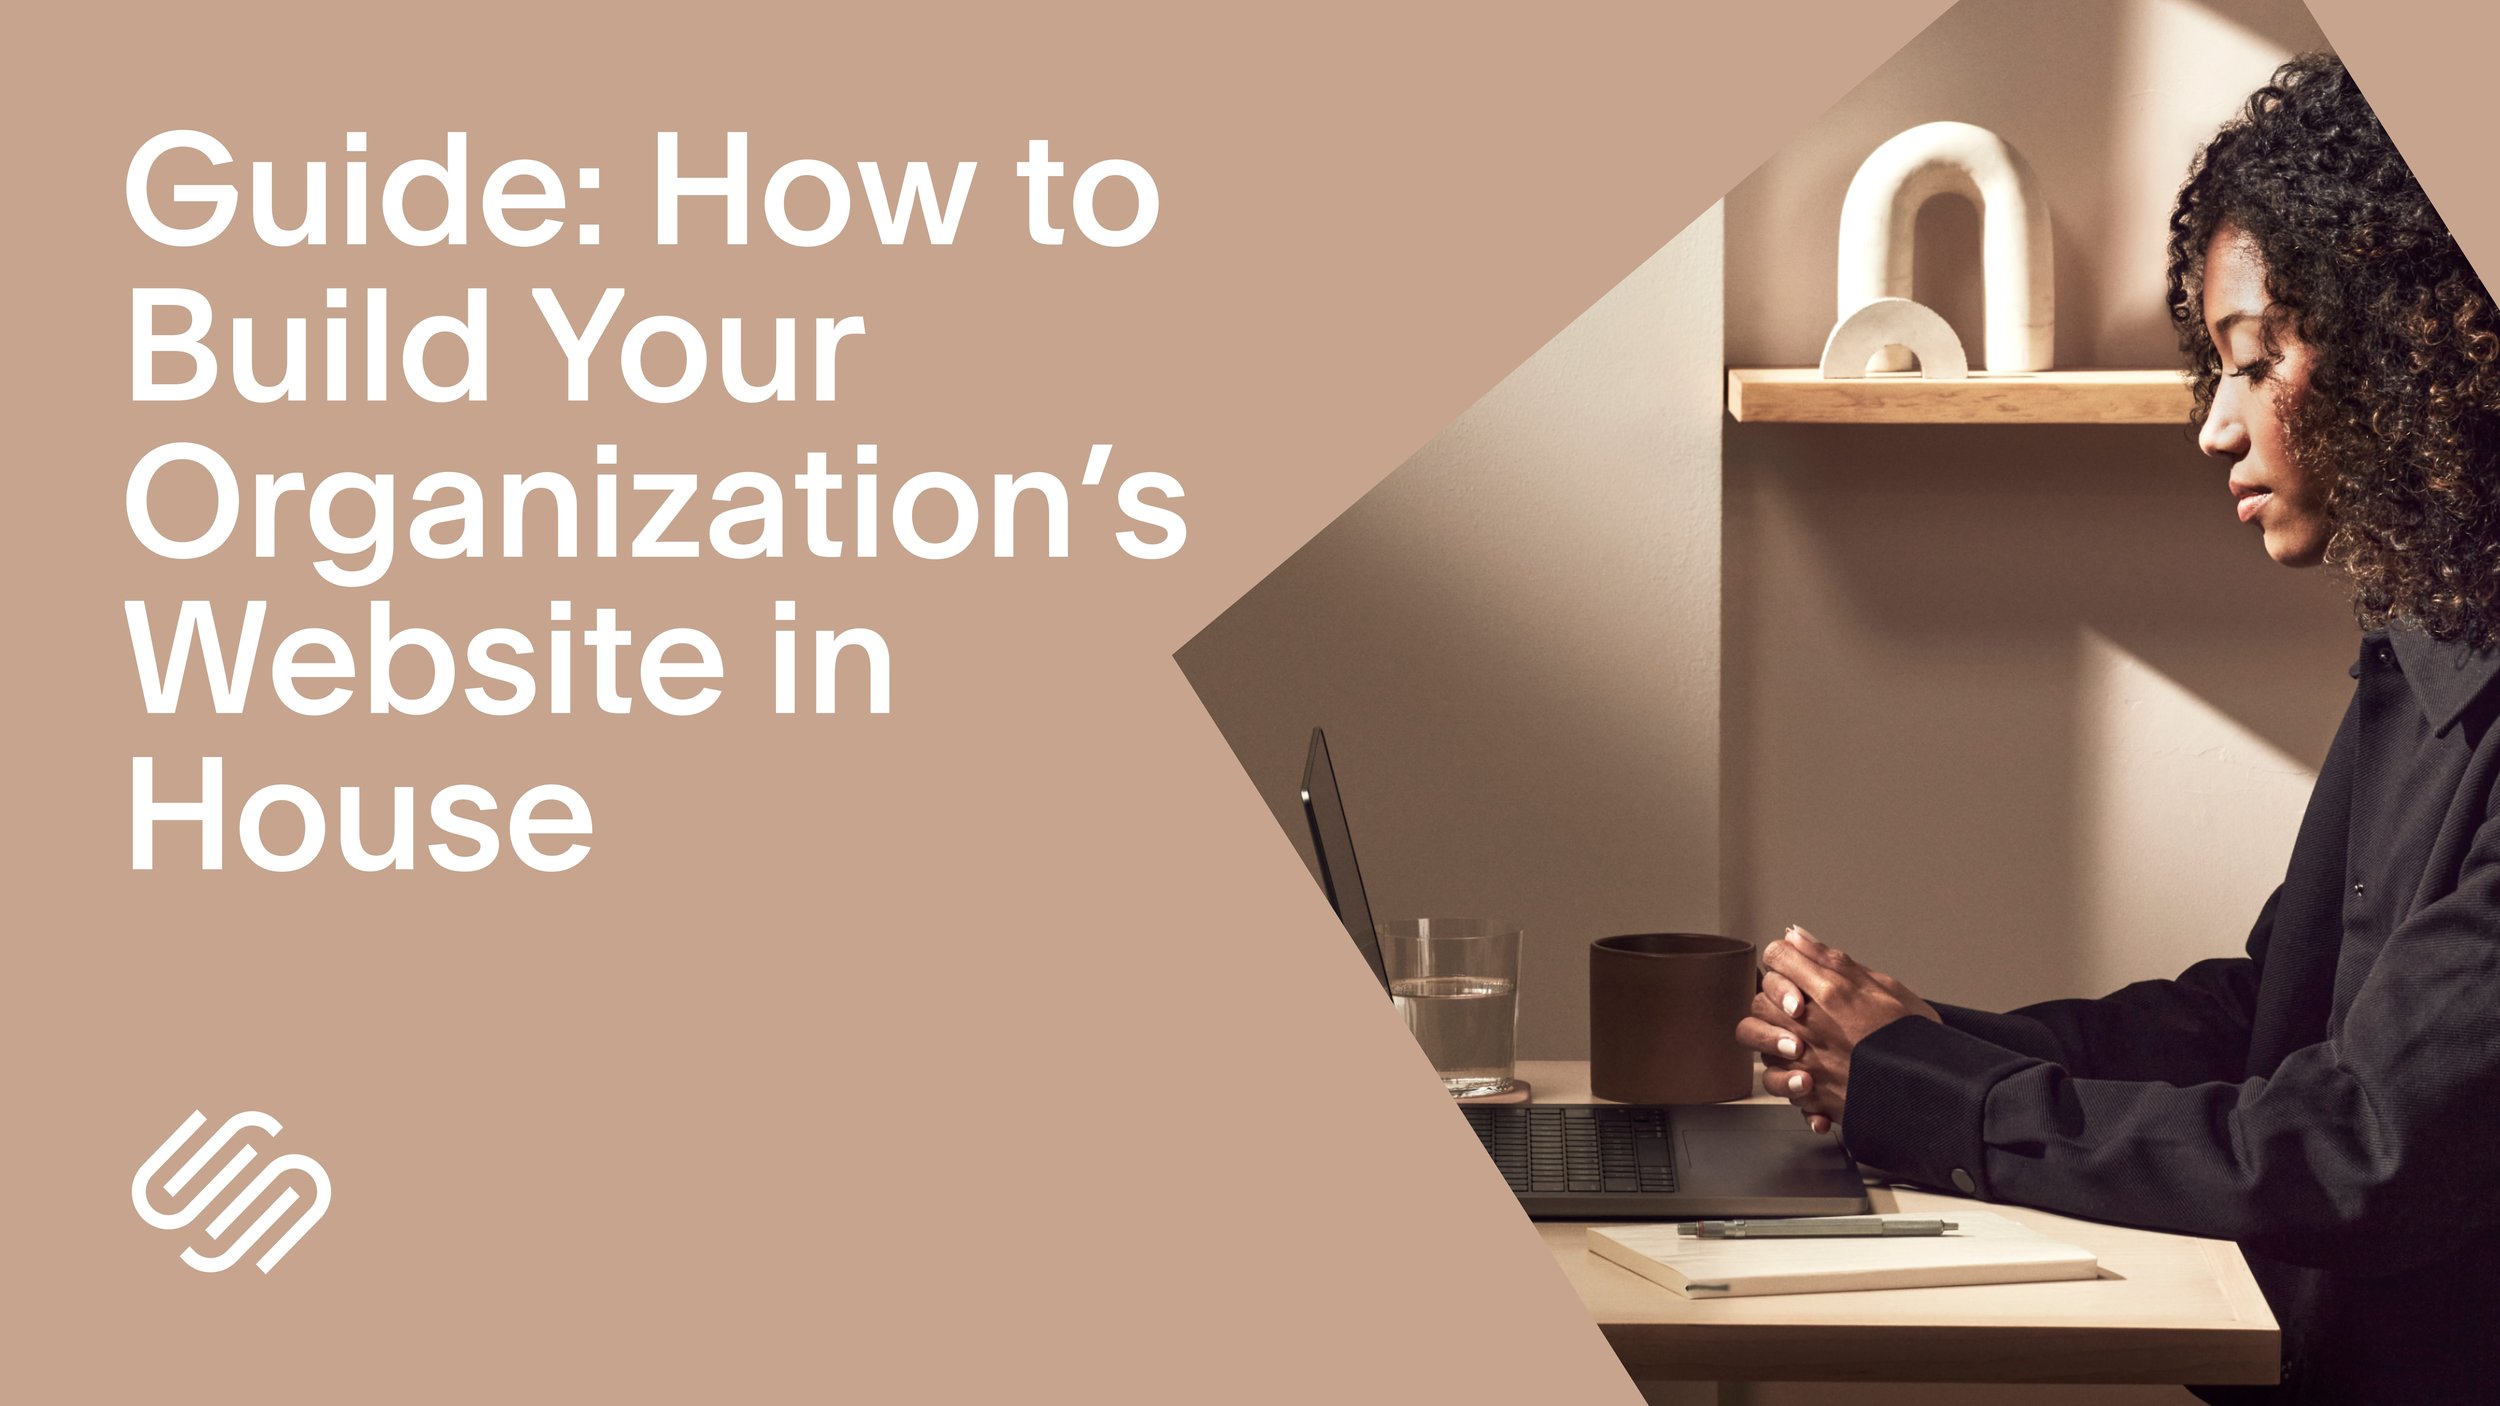 Guide: How to Build Your Organization’s Website in House